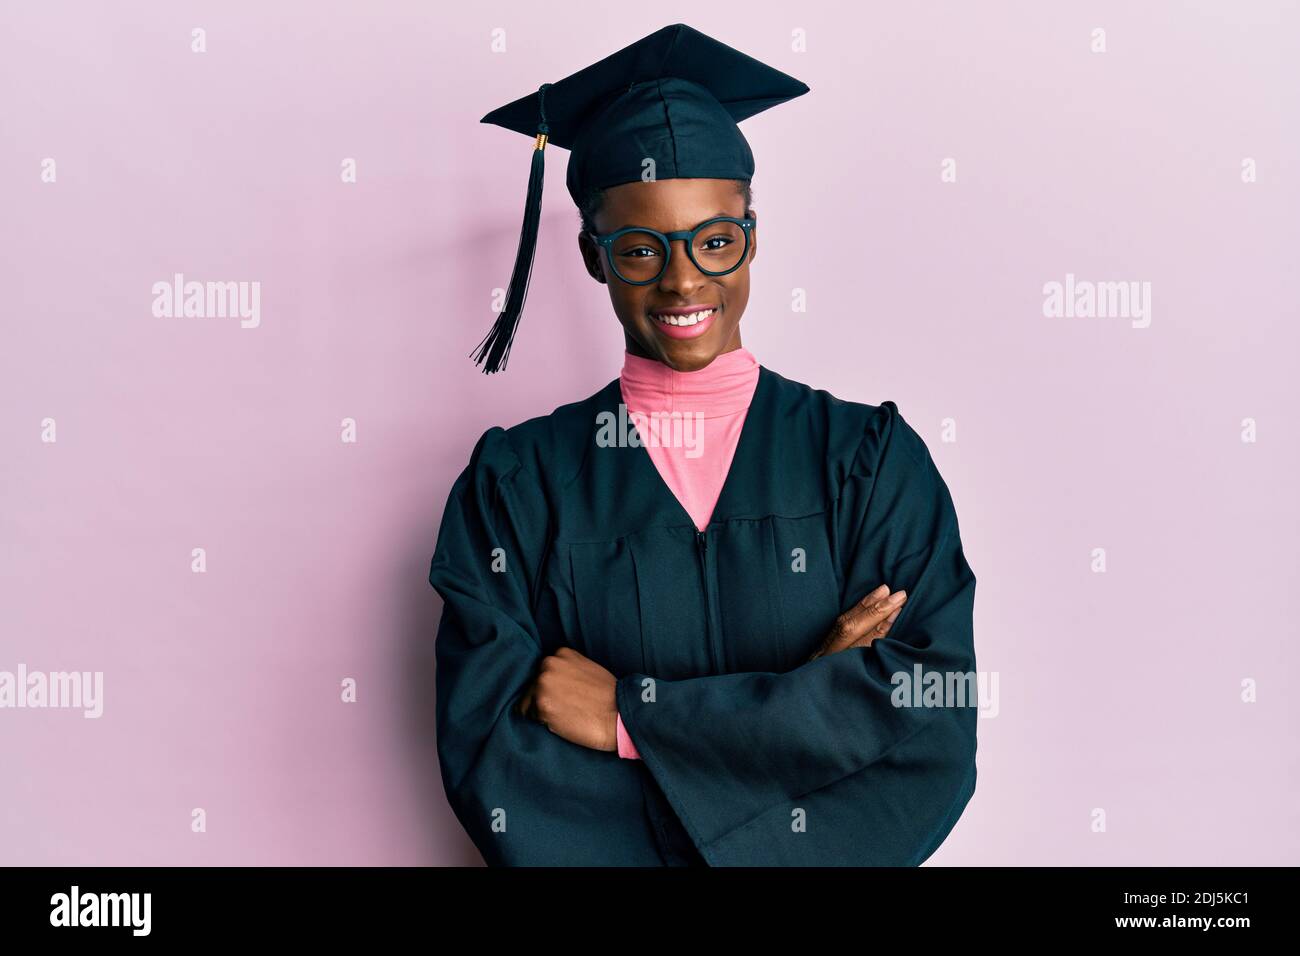 Young african american girl wearing graduation cap and ceremony robe happy face smiling with crossed arms looking at the camera. positive person. Stock Photo